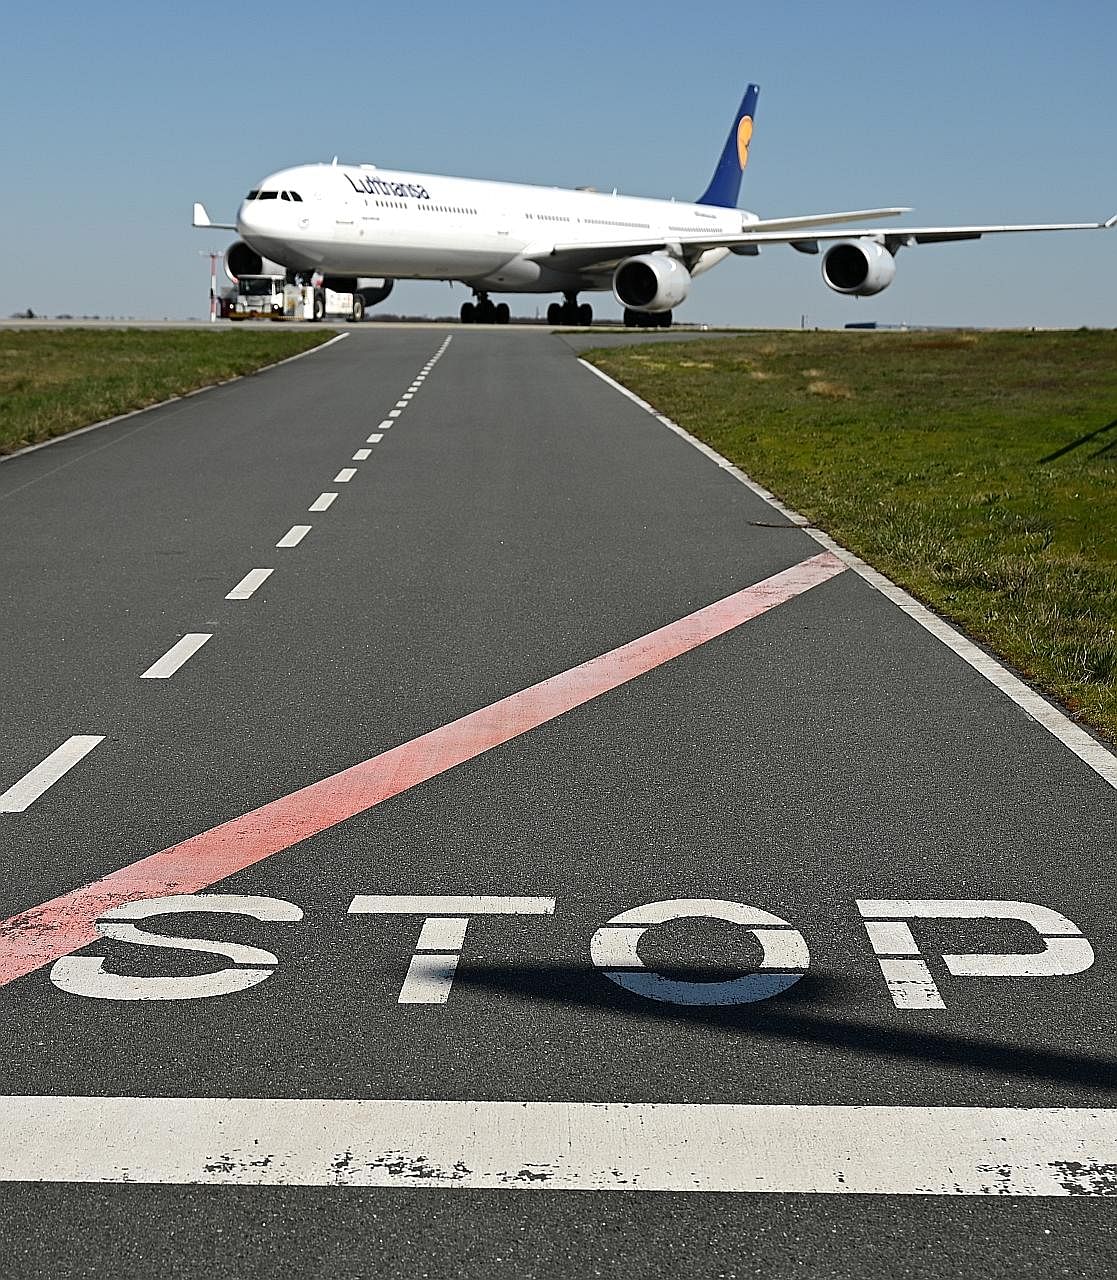 German airline Lufthansa has grounded 95 per cent of its fleet because of the coronavirus pandemic. The airline said on Thursday it would cancel all flights except those to return stranded tourists, until May 3. PHOTO: REUTERS